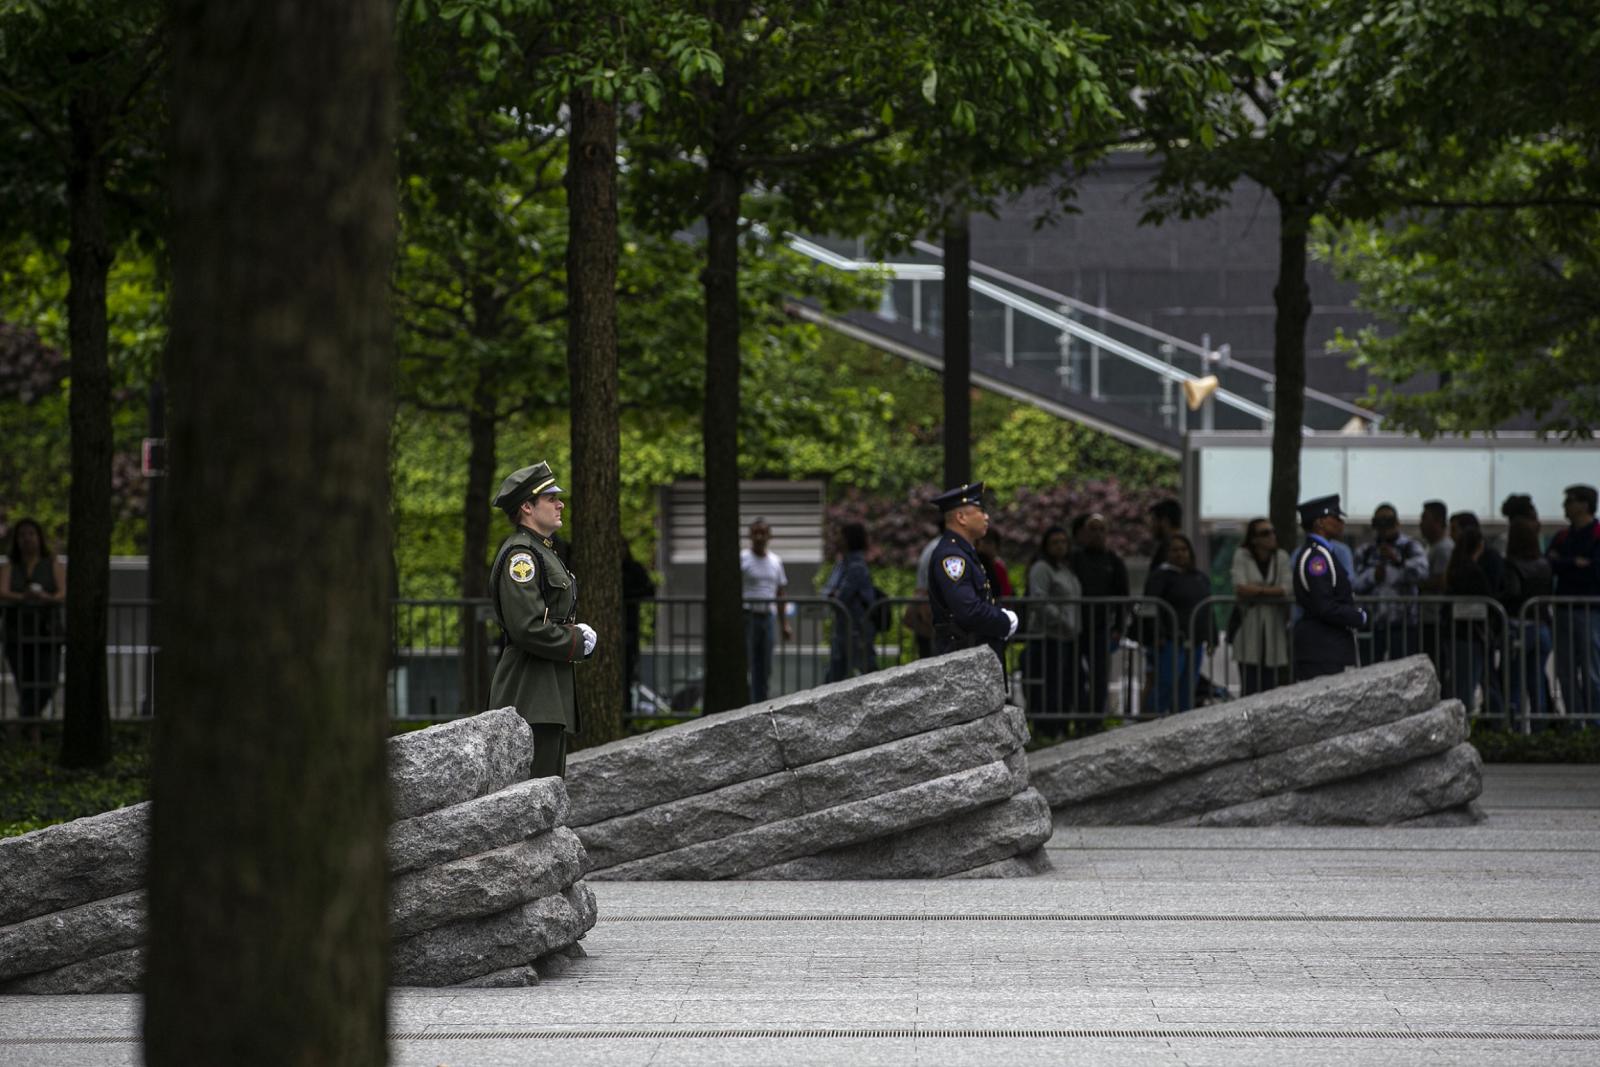 Three officials in formal uniforms stand beside three granite monoliths at the Memorial Glade. A crowd of people has gathered in the shade of trees behind them.